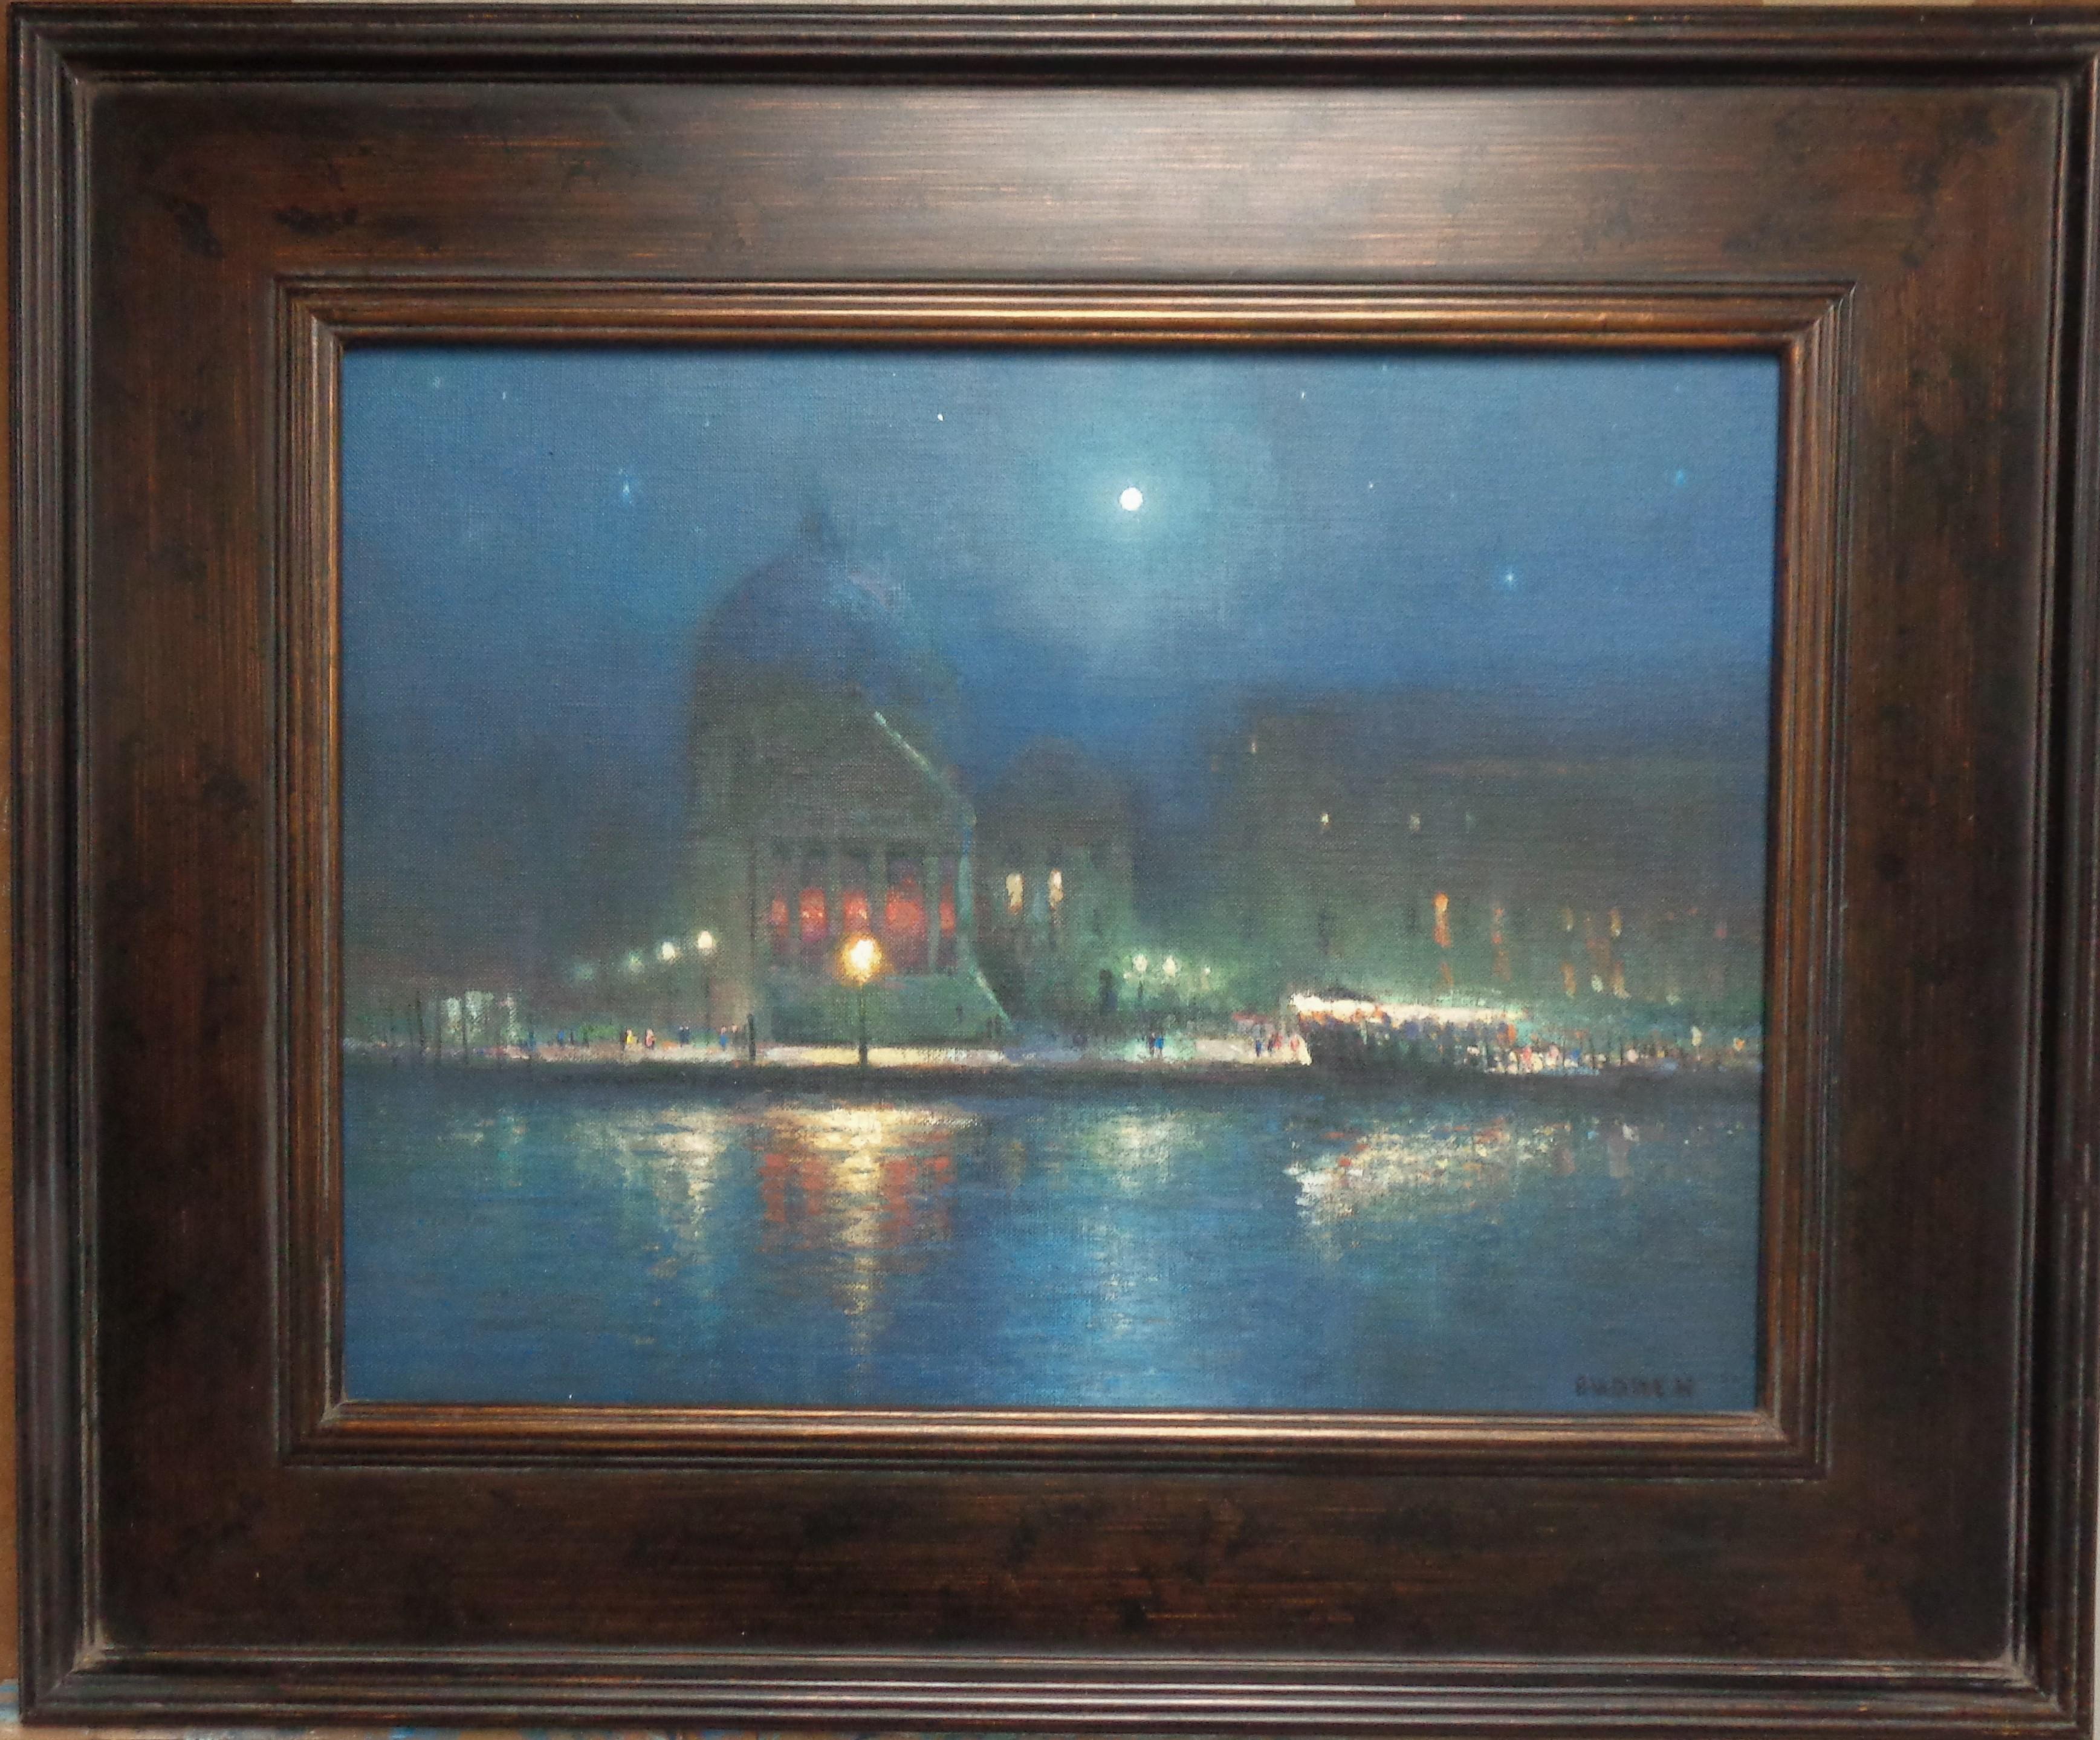 Moonlight on the Canal, Venice
oil/panel
12 x 16 unframed, 18.38 x 22.38 framed
Moonlight on the Canal is a beautiful  oil painting on canvas panel by award winning contemporary artist Michael Budden that showcases a moonlit evening in Venice and